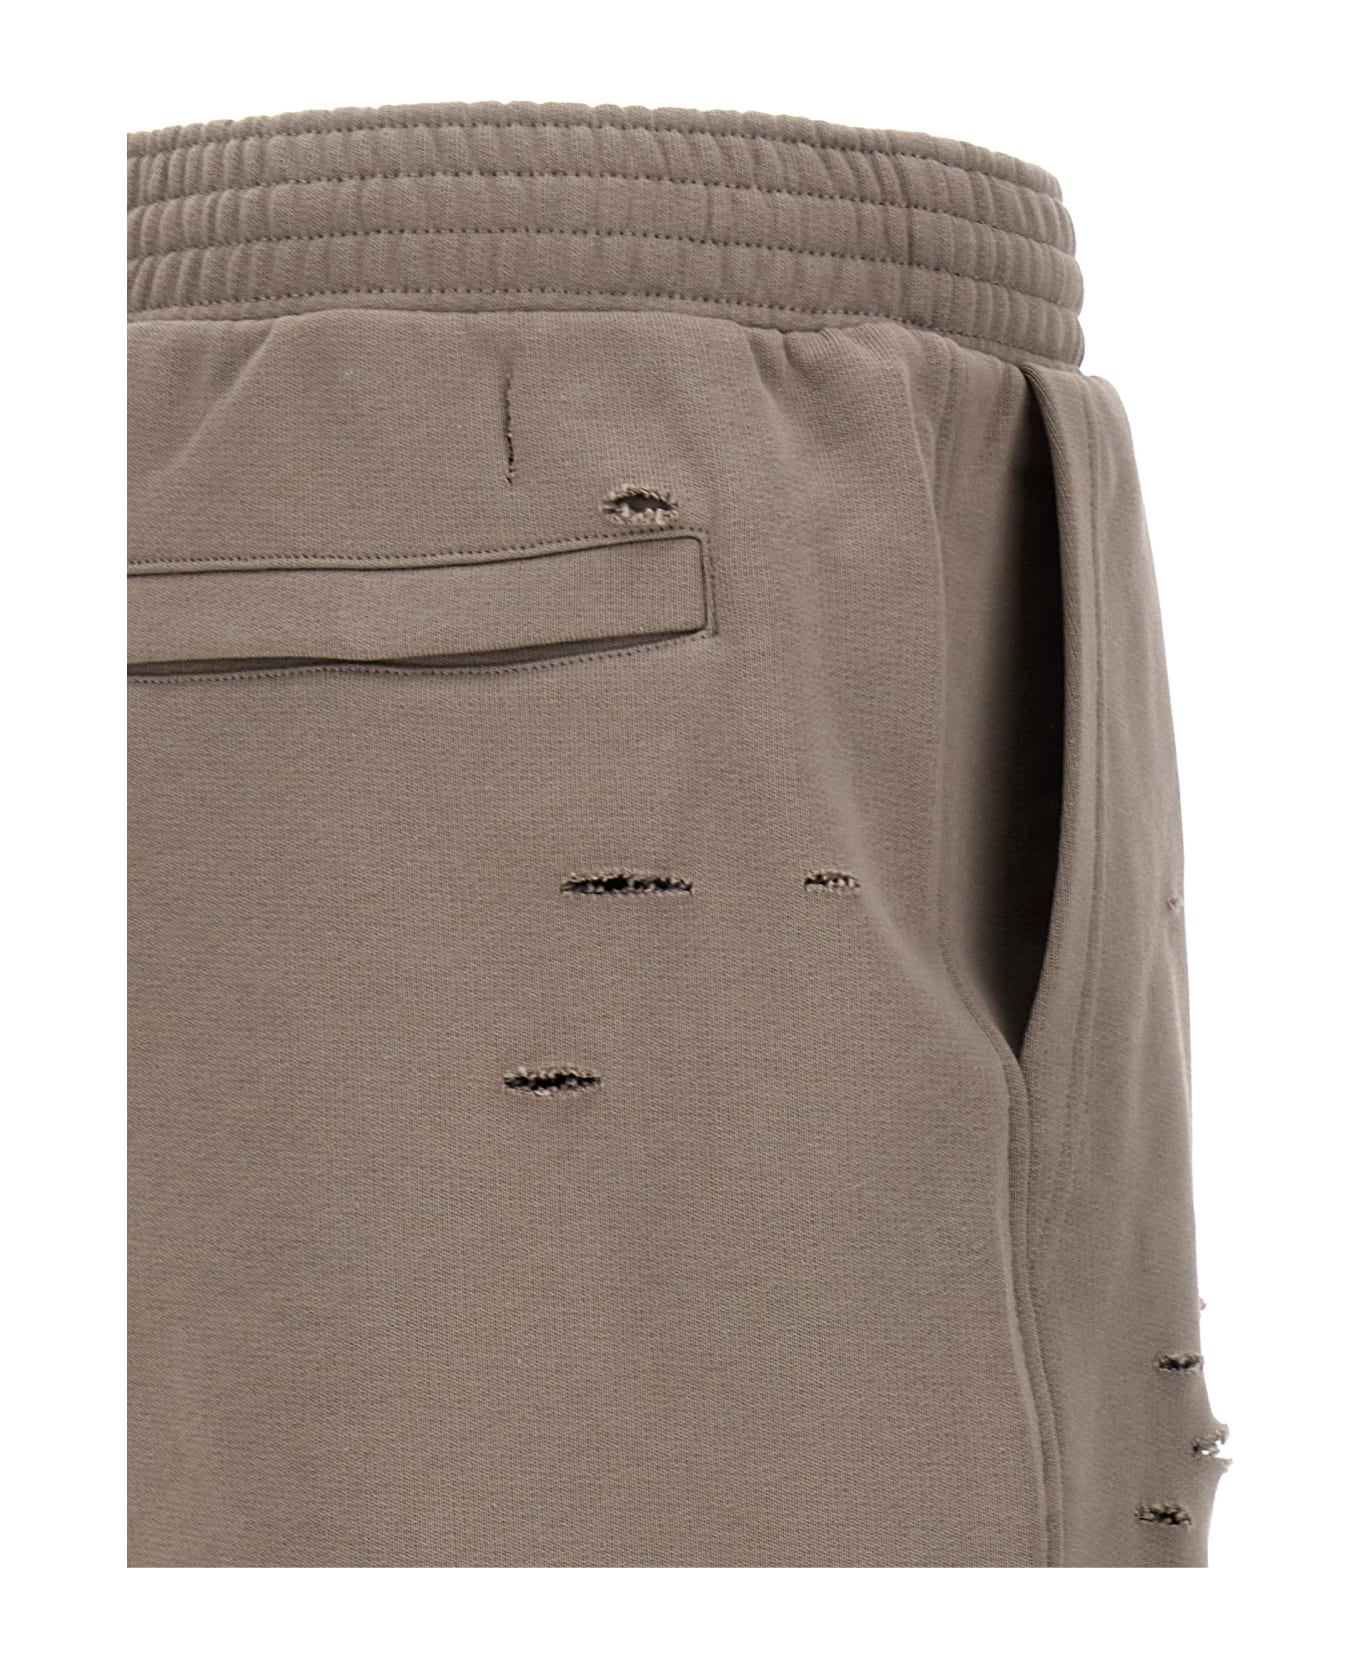 Givenchy Destroyed Effect Bermuda Shorts - Gray